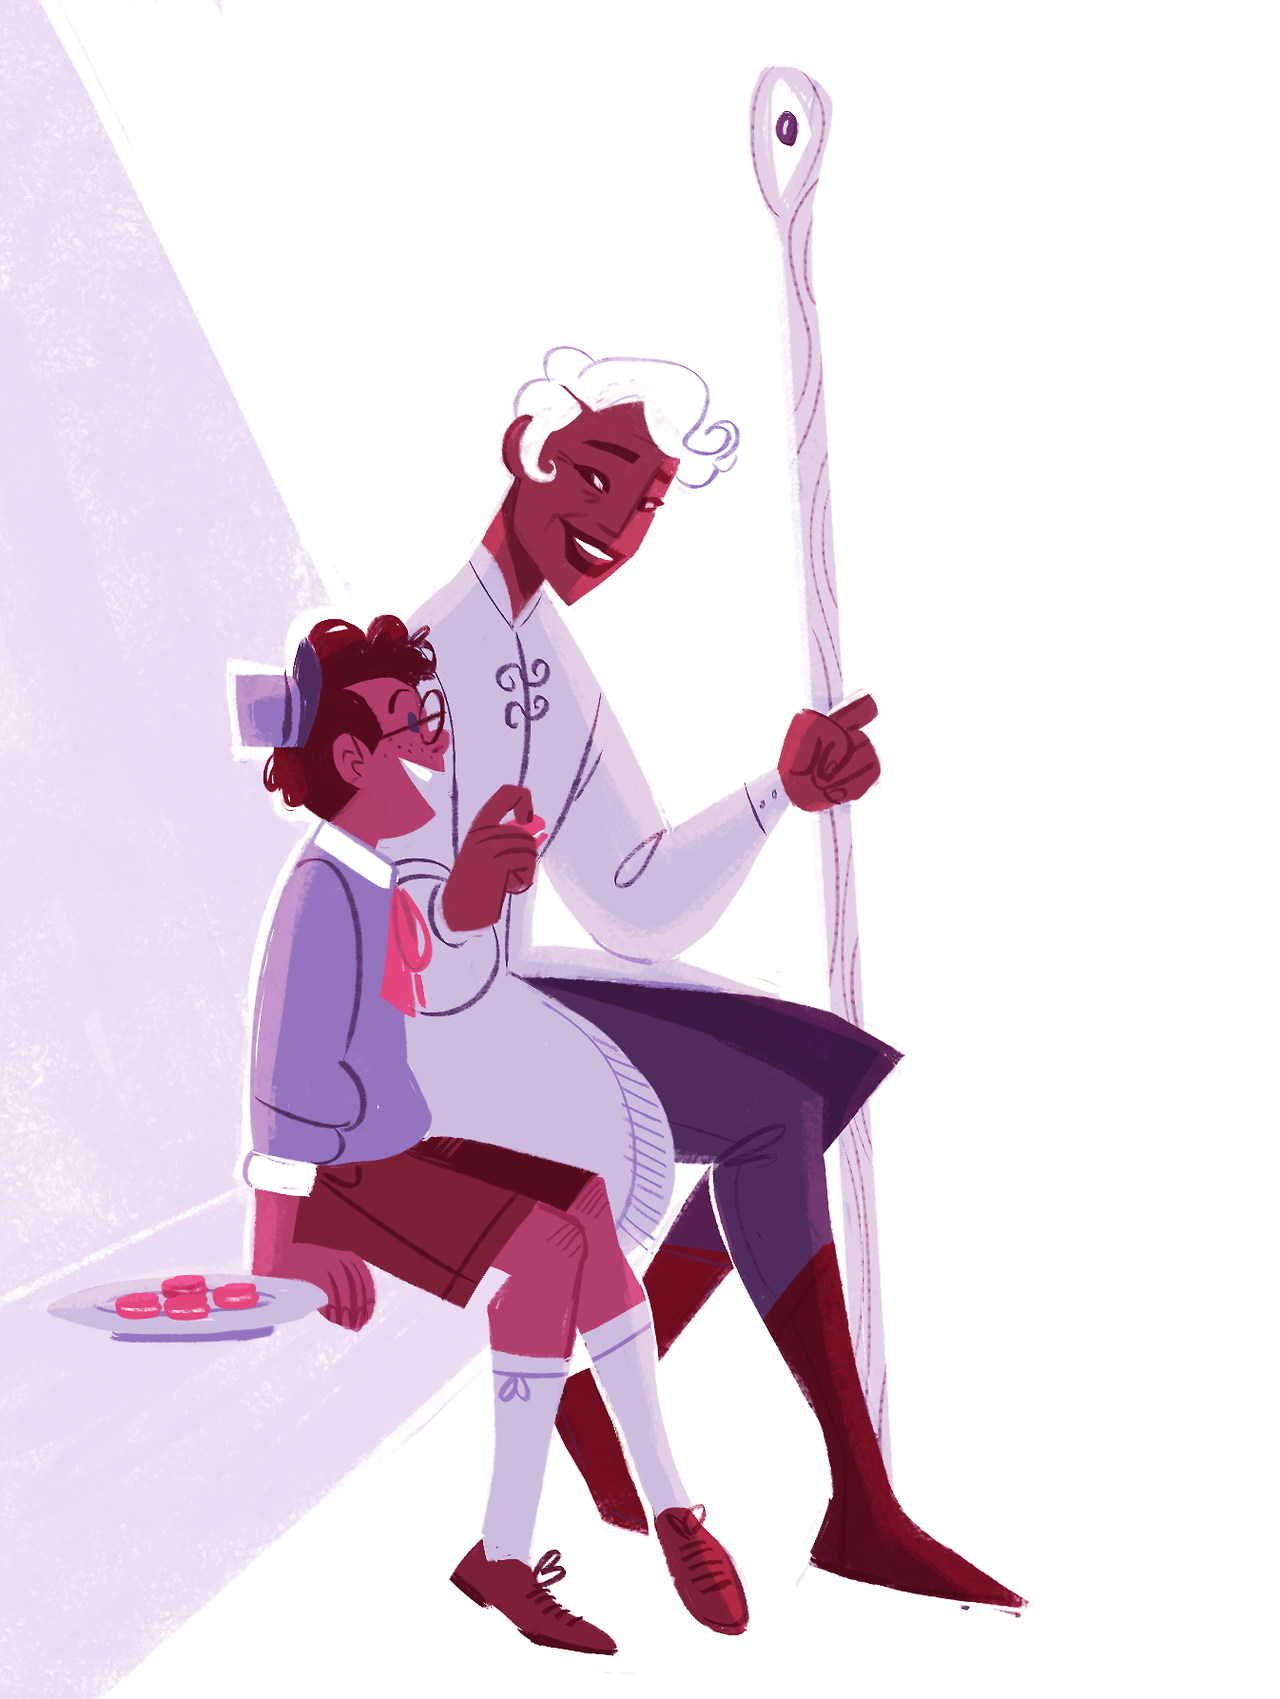 mayorofdunktown: @ghostecutioner wanted me to draw lucretia and ango and friendship 